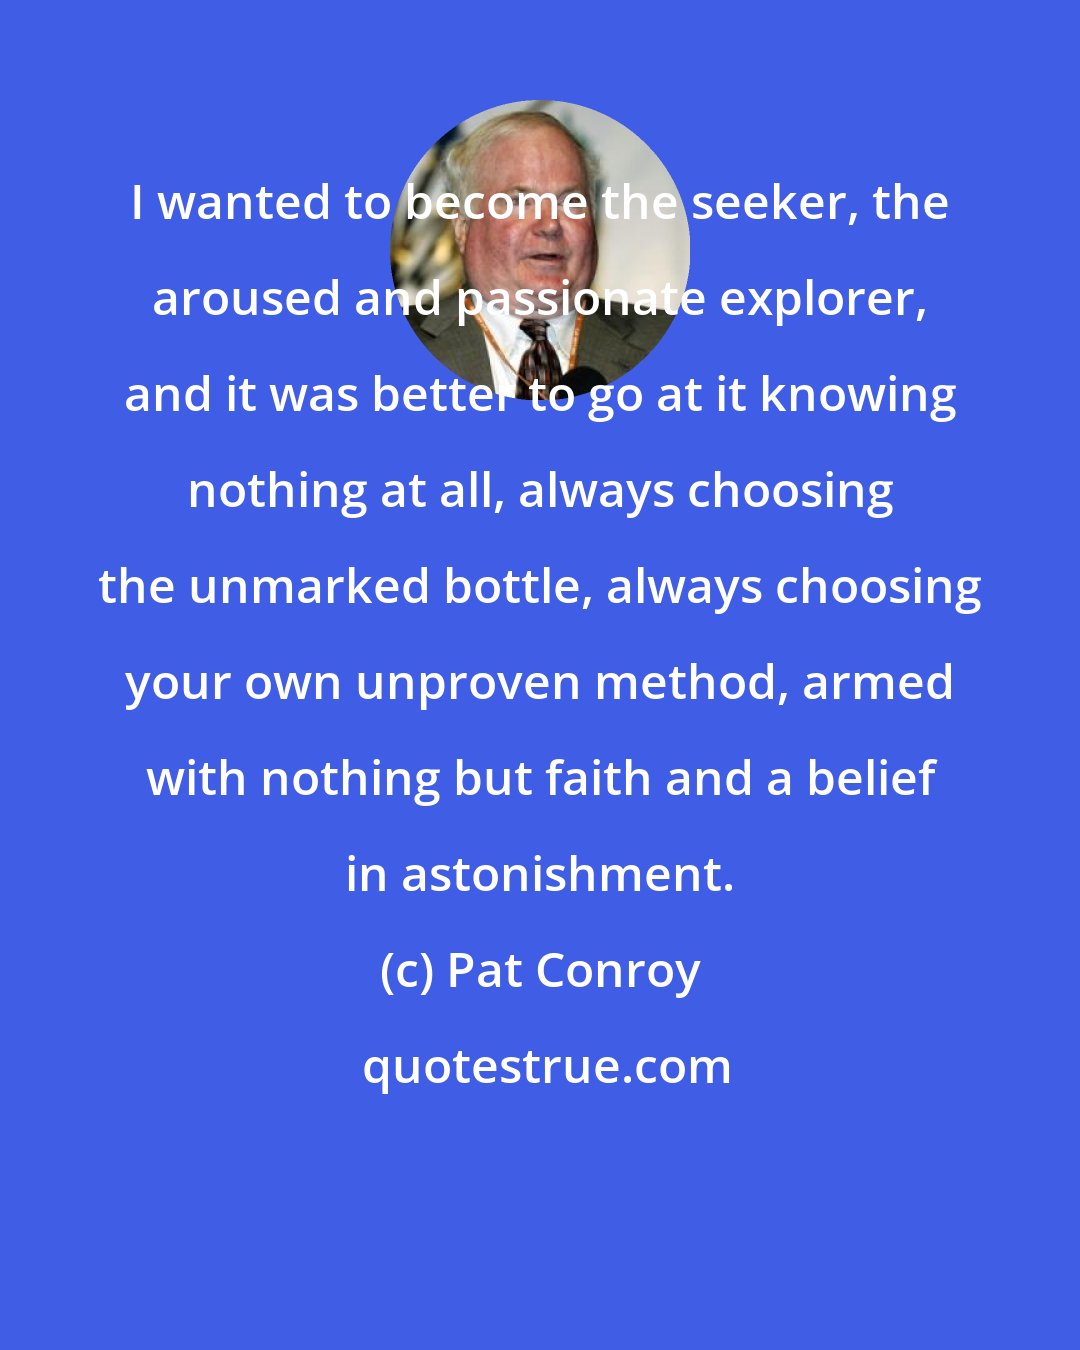 Pat Conroy: I wanted to become the seeker, the aroused and passionate explorer, and it was better to go at it knowing nothing at all, always choosing the unmarked bottle, always choosing your own unproven method, armed with nothing but faith and a belief in astonishment.